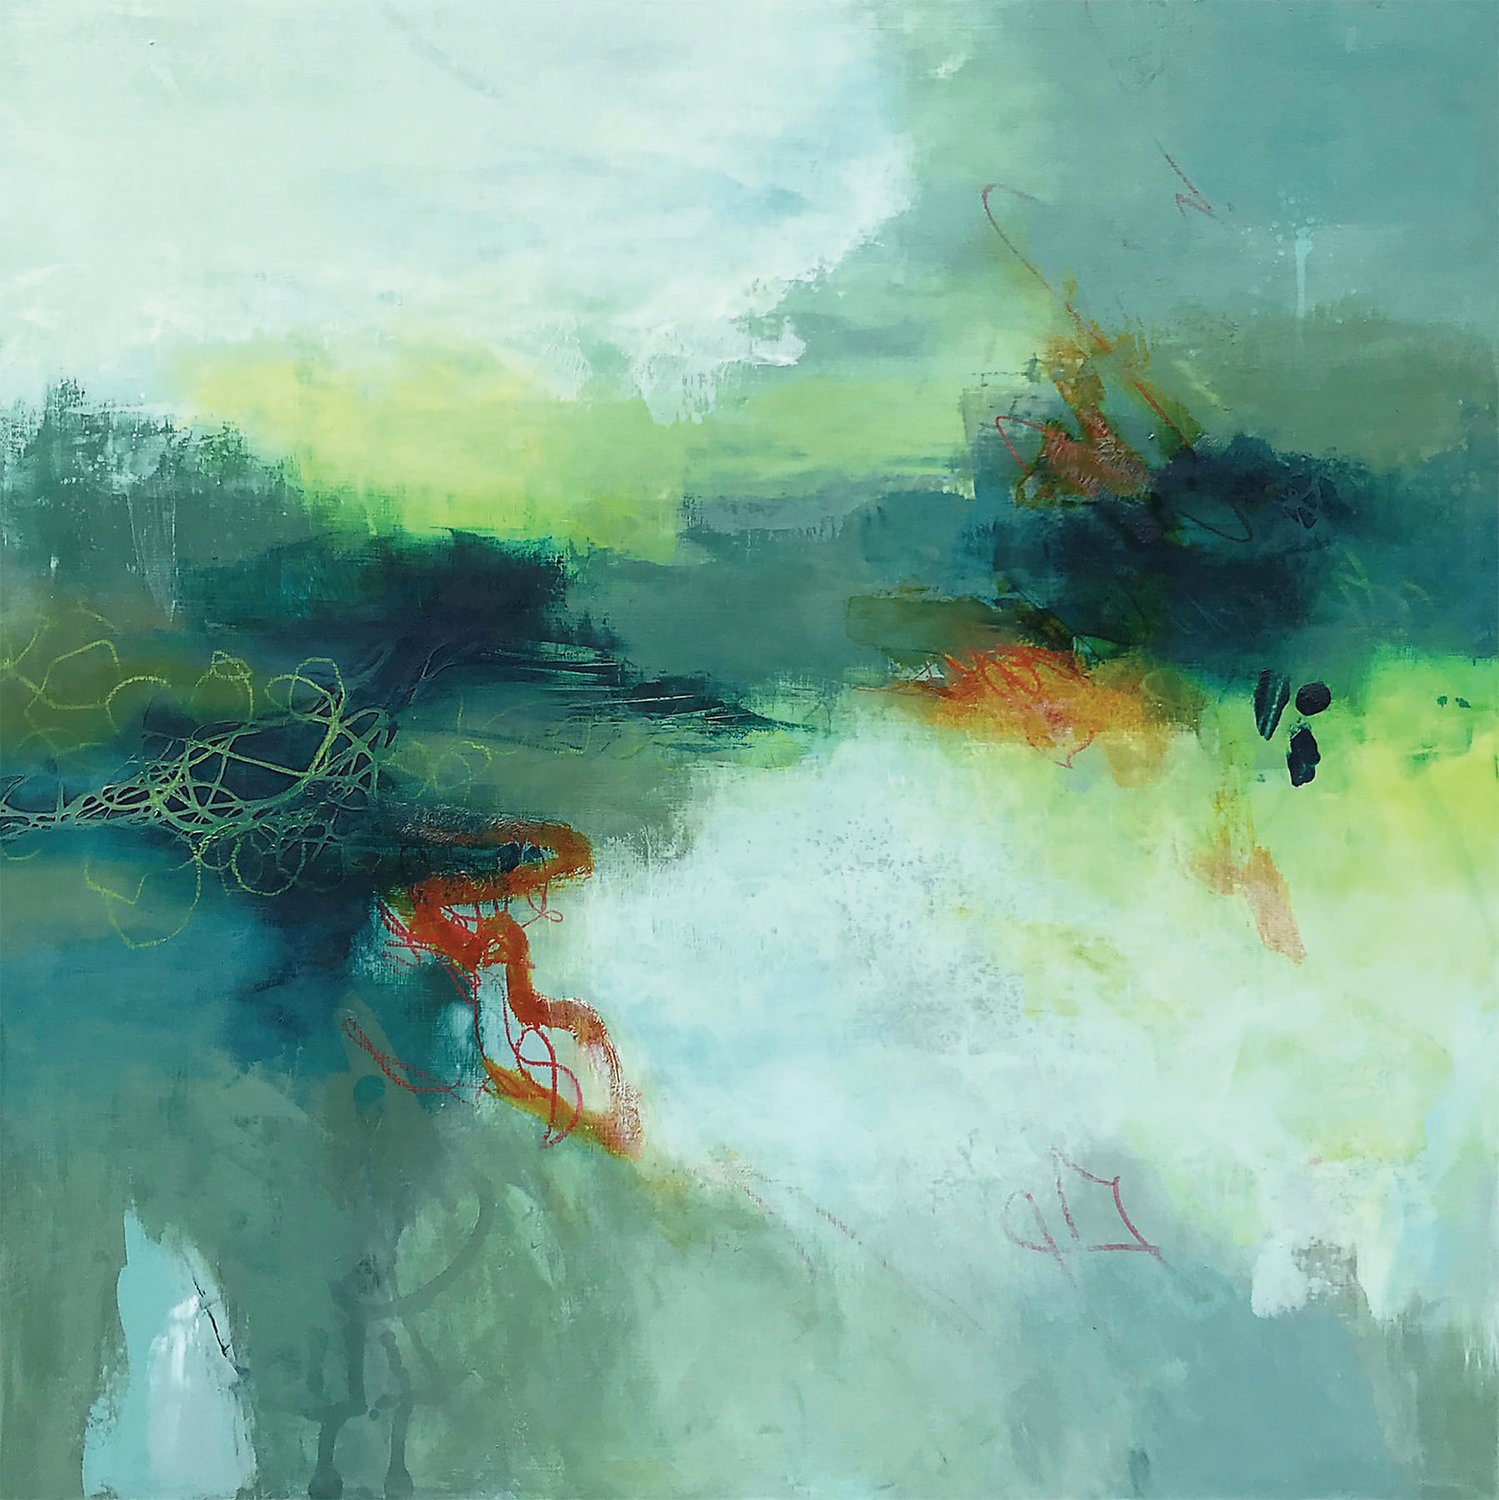 “Summer Sage” is by Yardley artist Jo-Ann Osnoe, whose new abstract works in oil and cold wax will be on view.